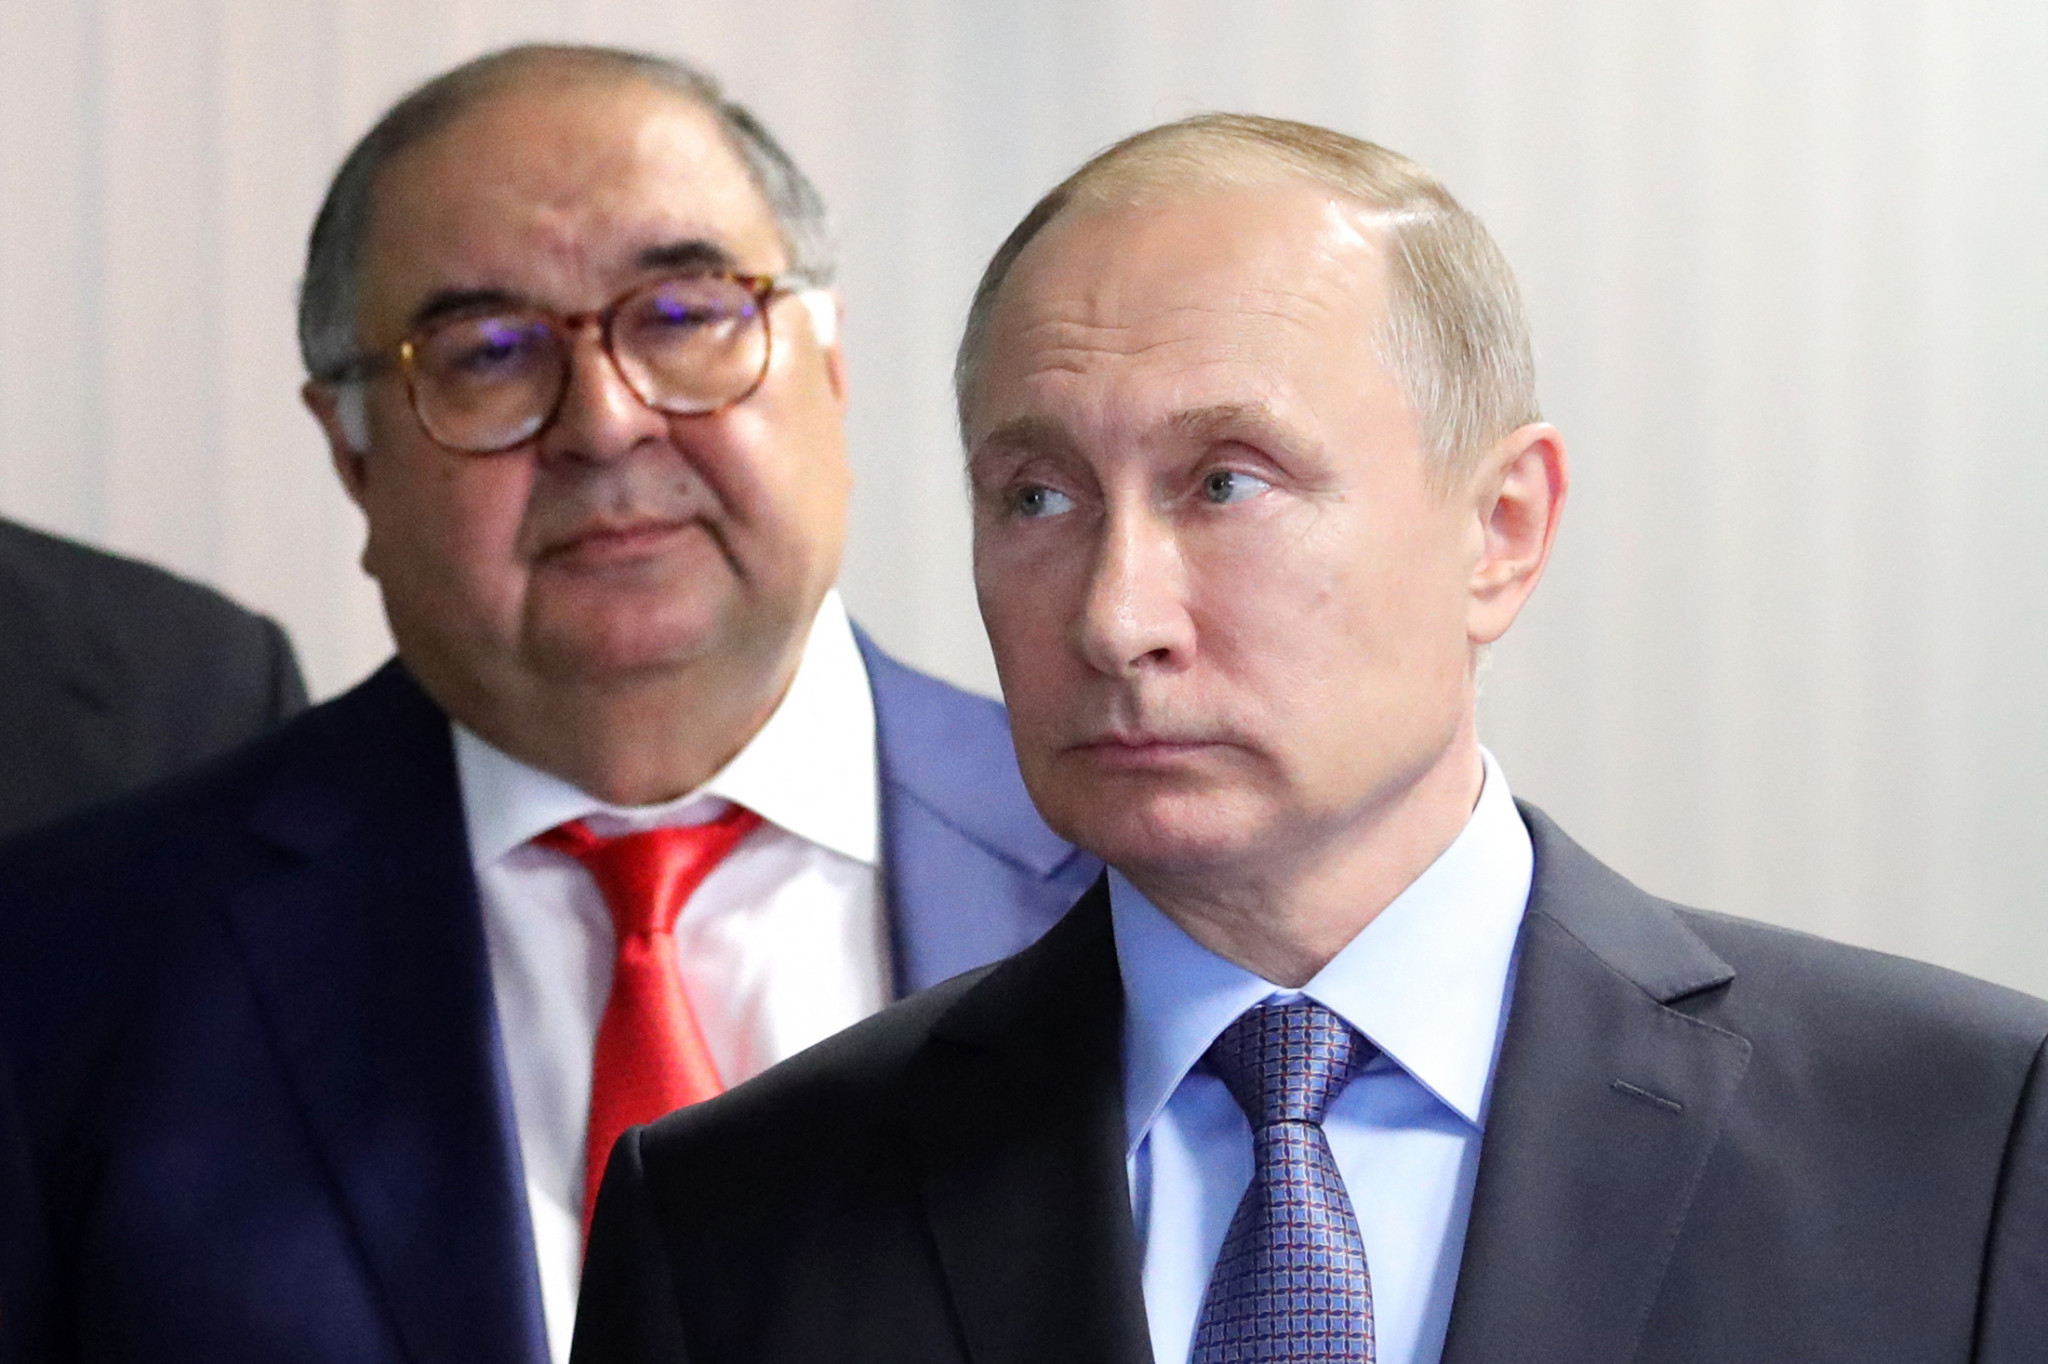 Alisher Usmanov, left, stepped aside as FIE President following EU sanctions imposed over the war in Ukraine  ©Getty Images